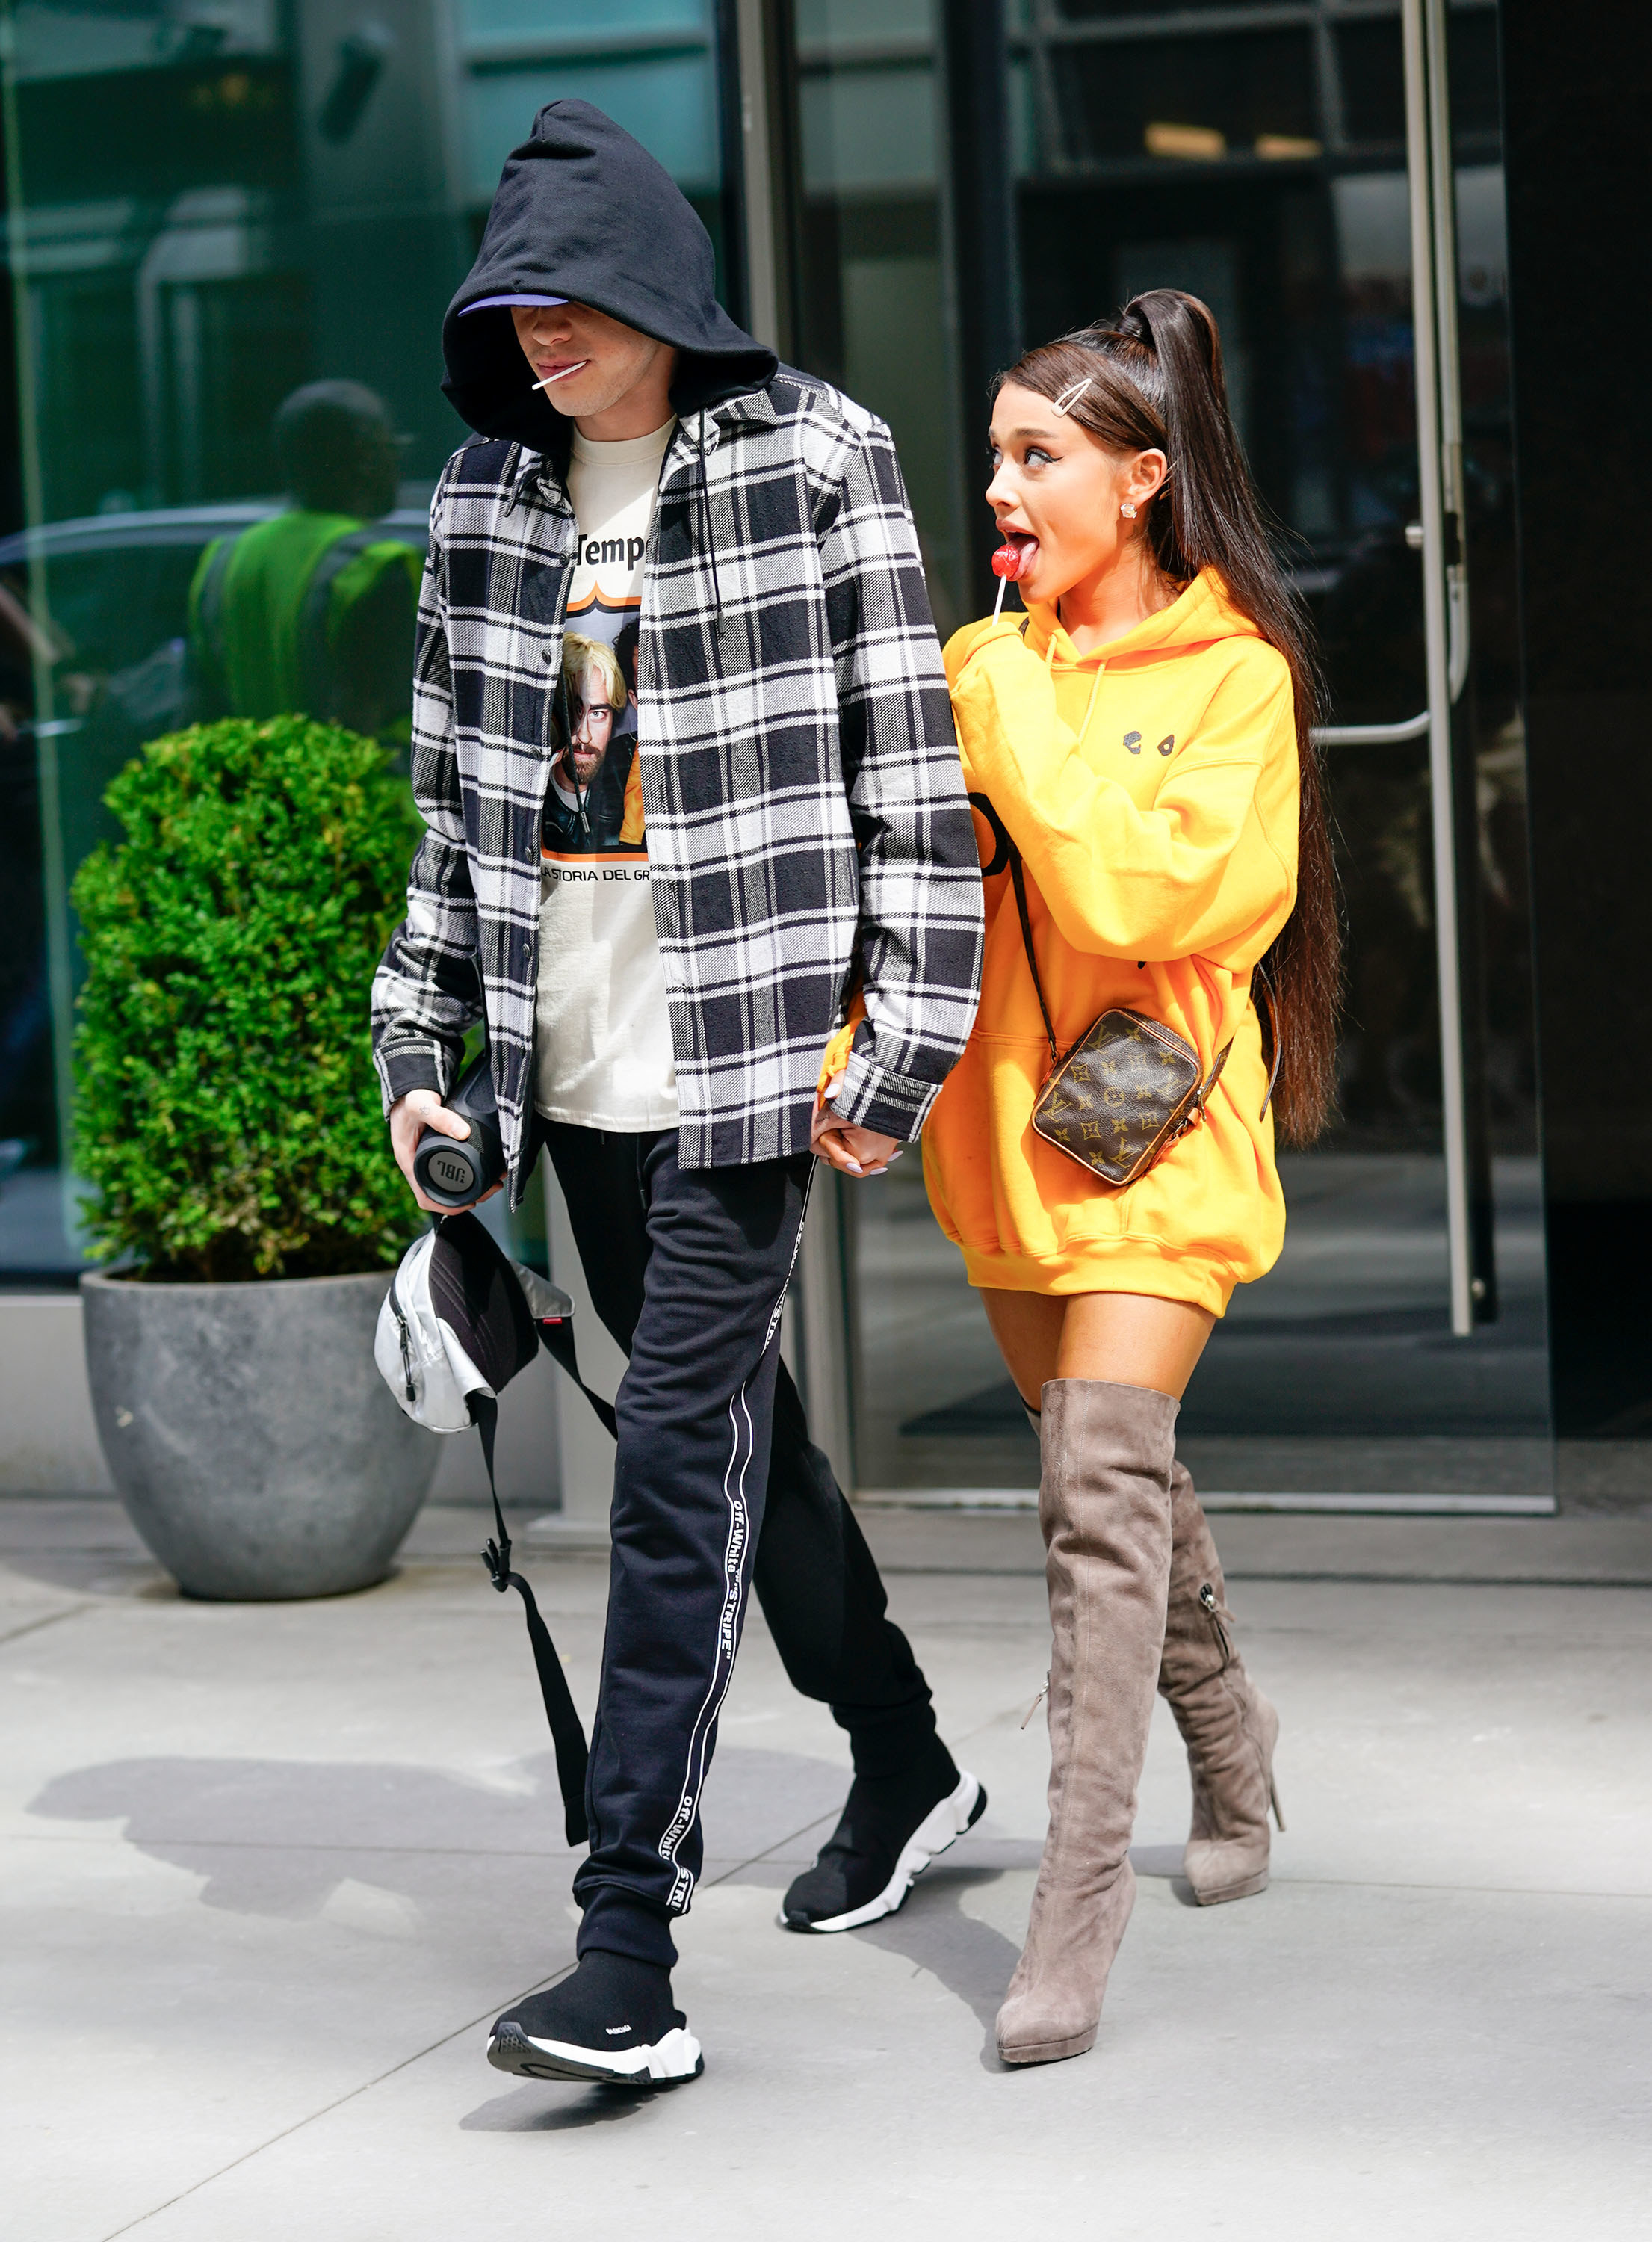 pete walking with ariana grande